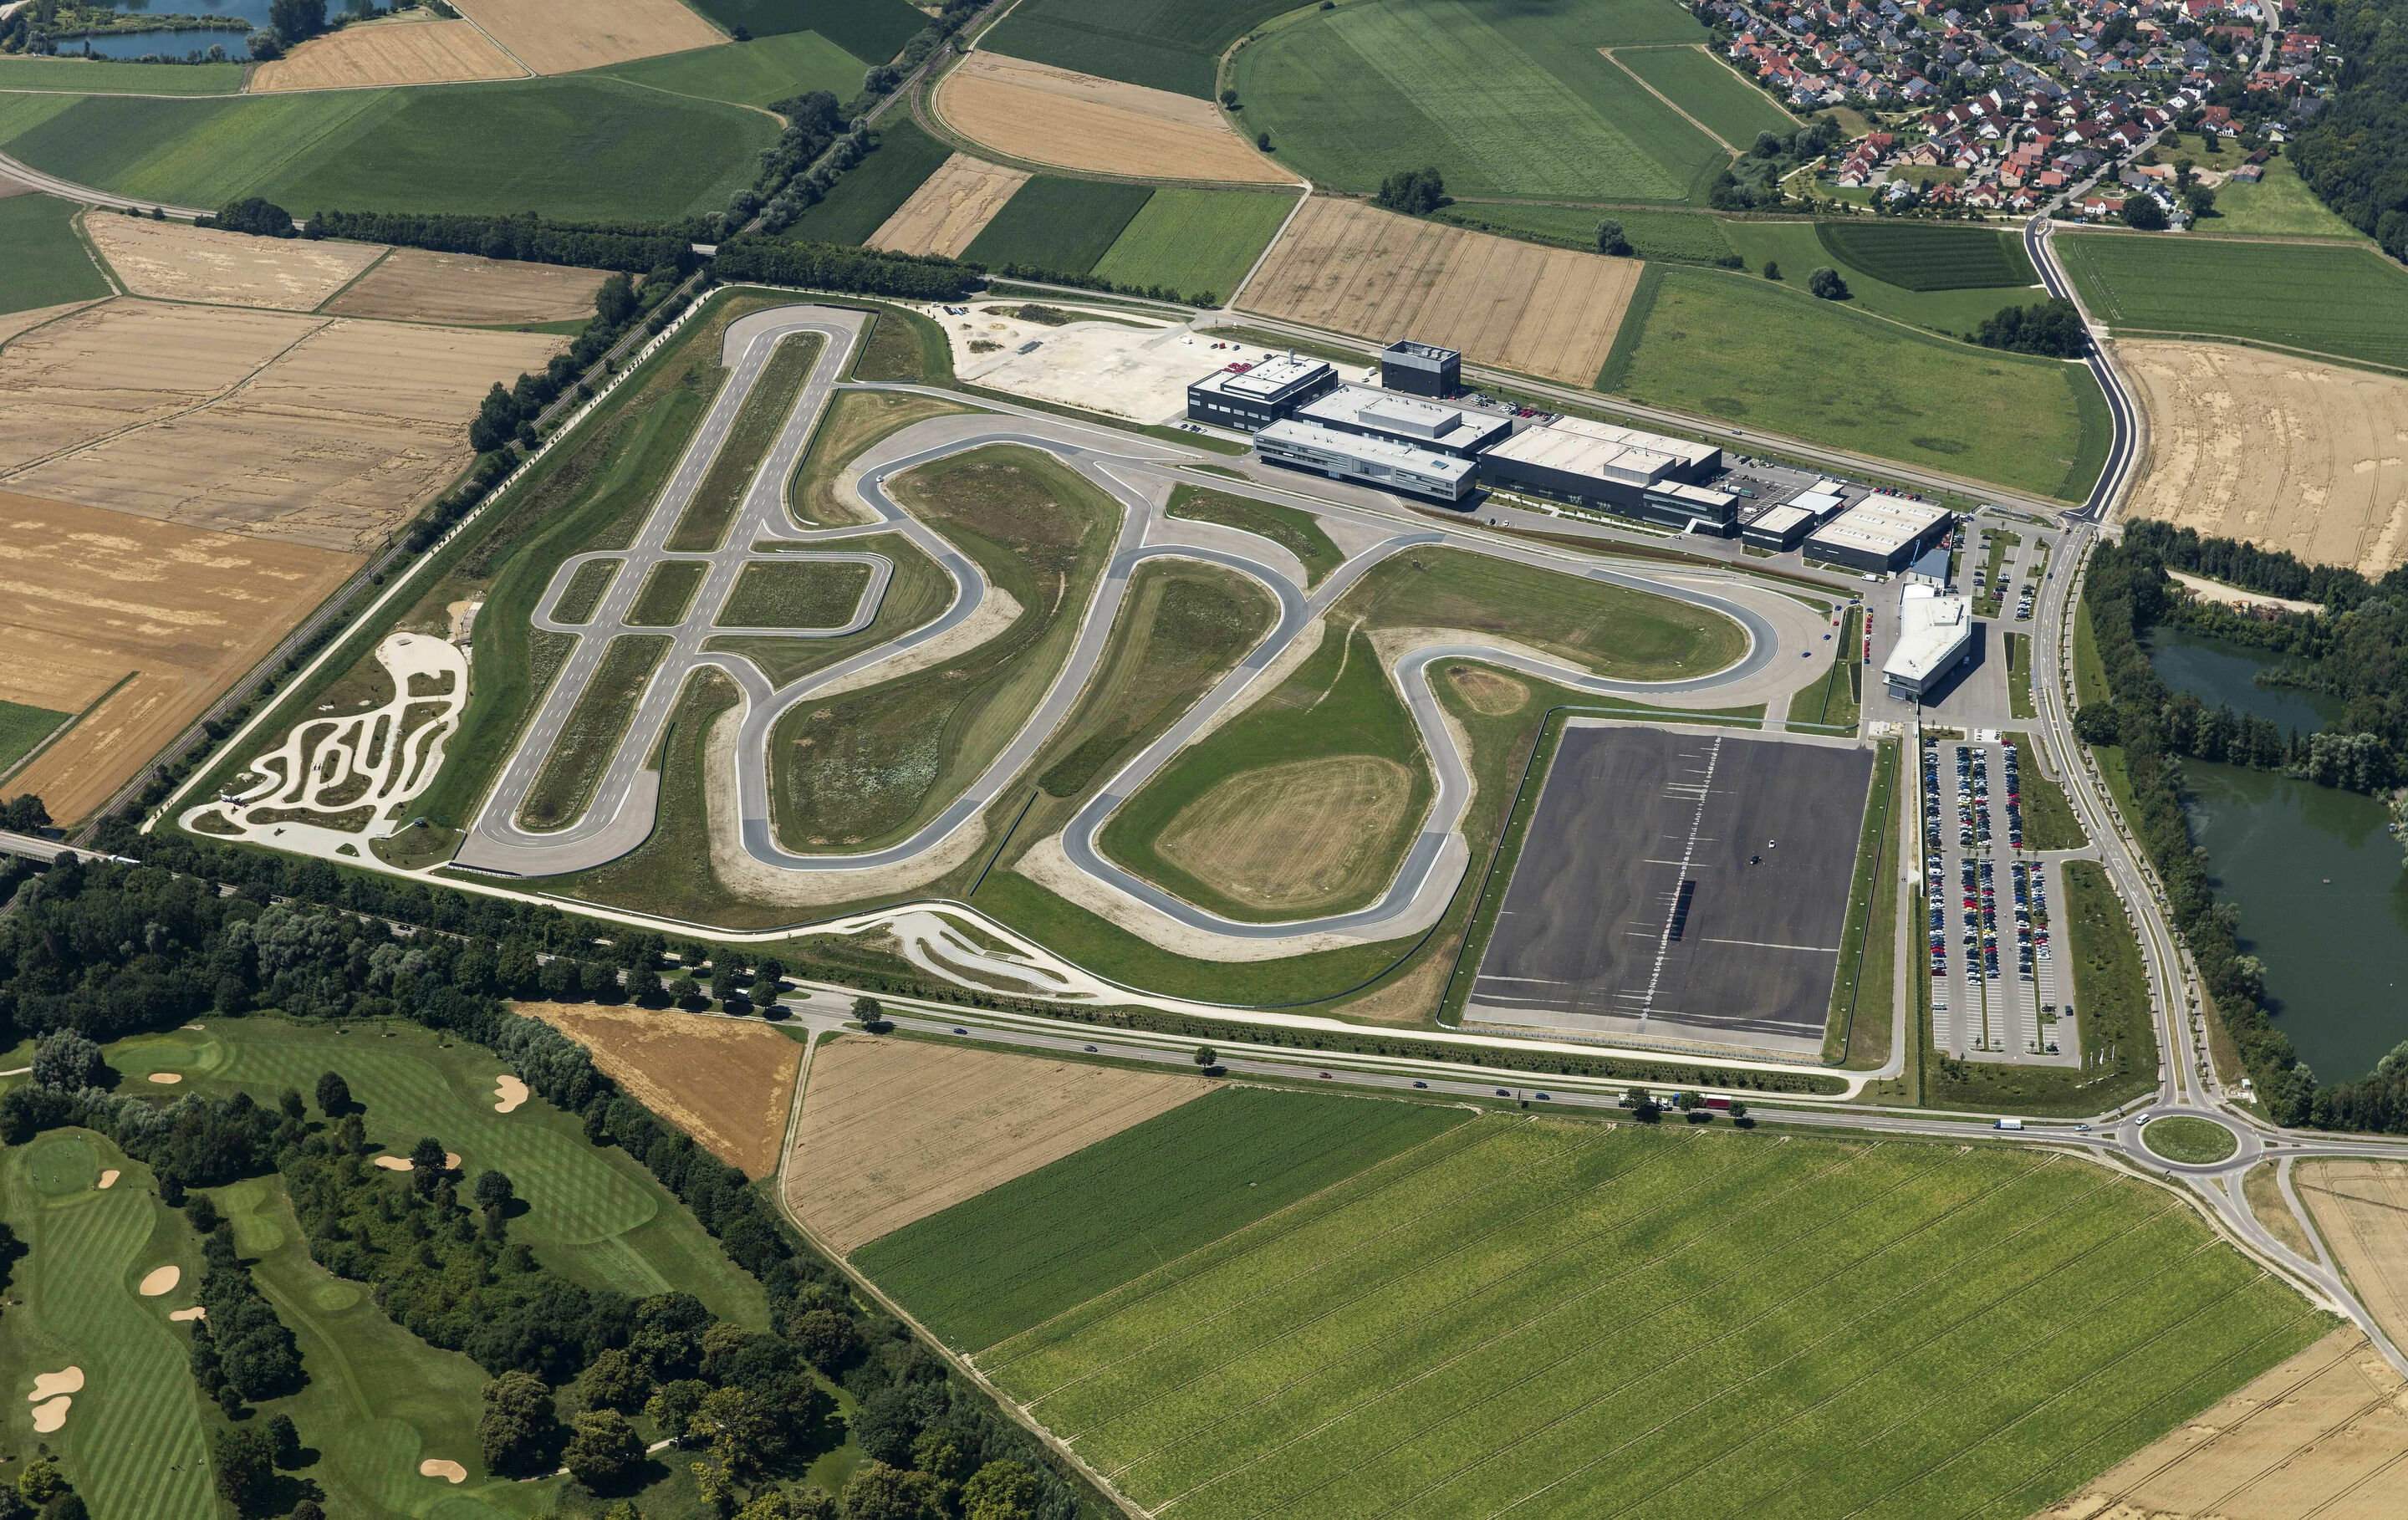 Driver training courses, events and motorsport: Audi Neuburg the visitor magnet.